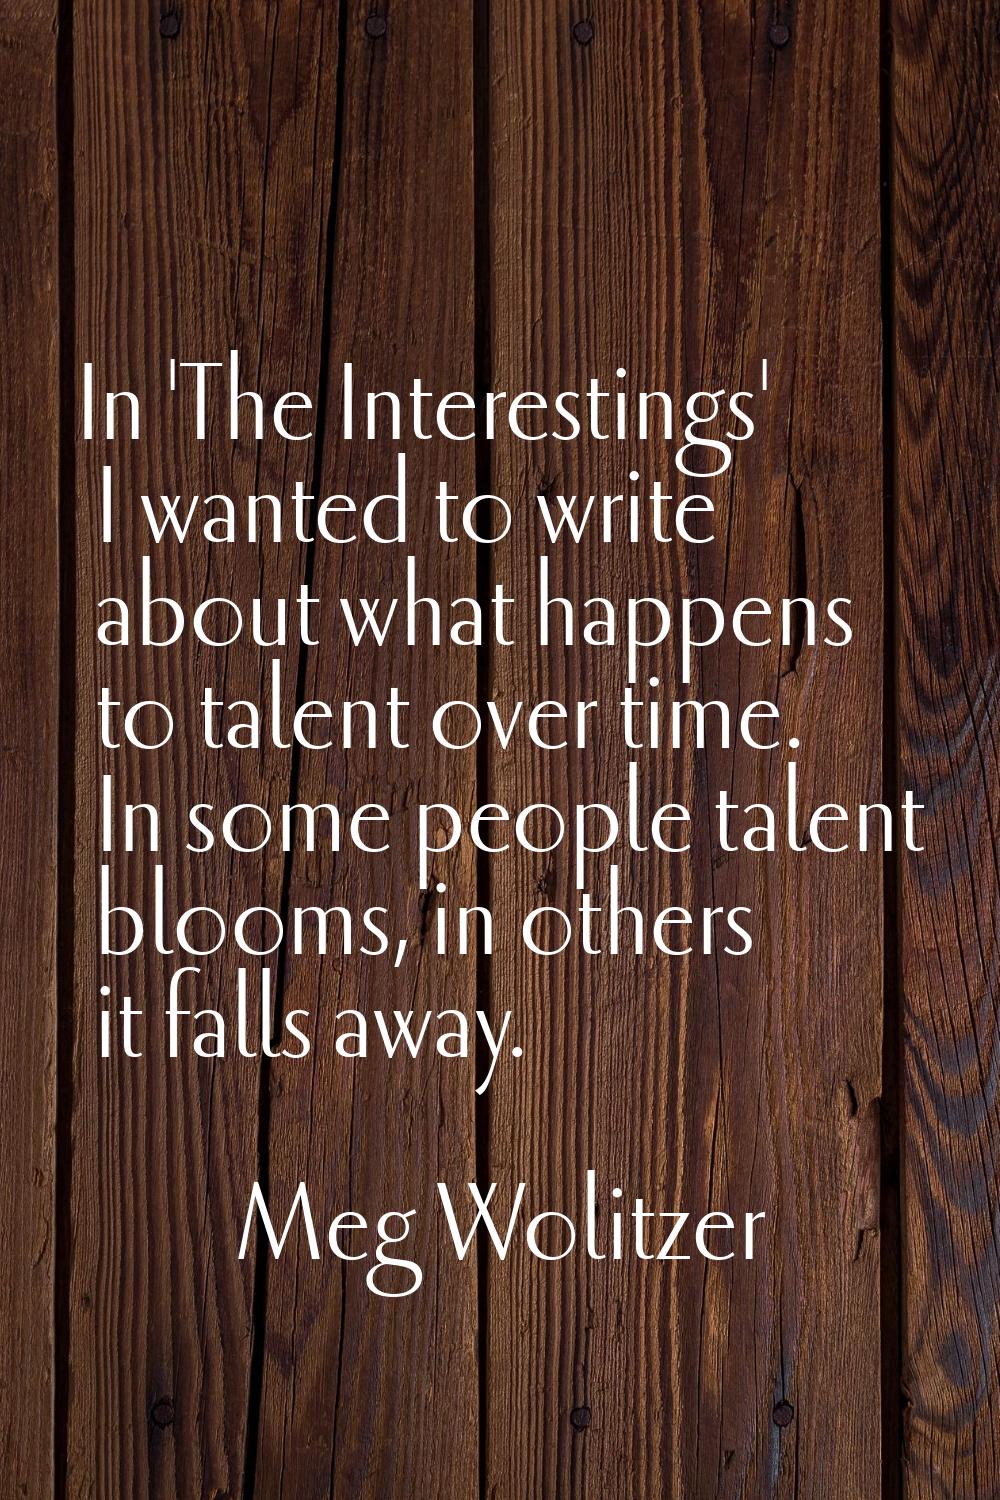 In 'The Interestings' I wanted to write about what happens to talent over time. In some people tale